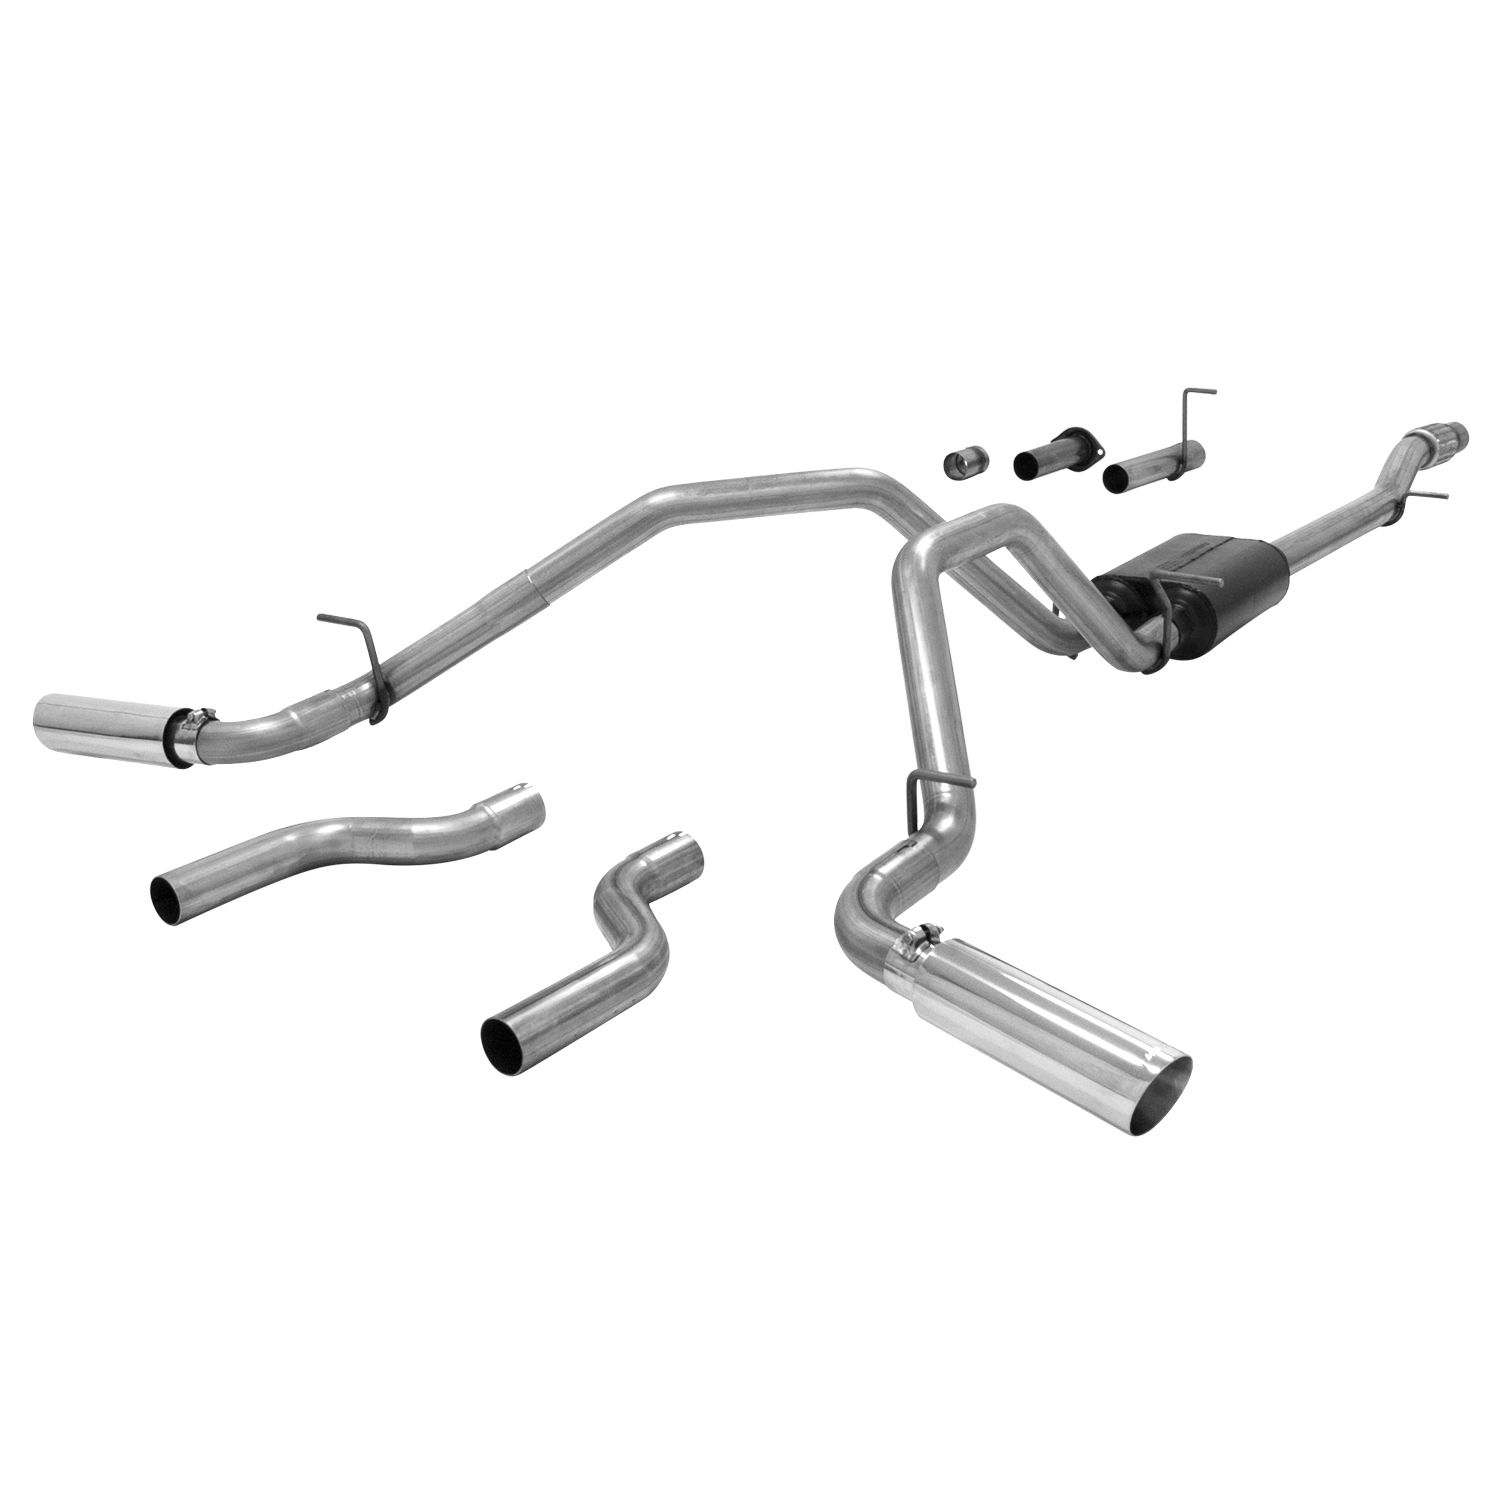 2007-2008 GMC Sierra 1500 4.8L 4DR Crew Cab/EXT Cab Flowmaster American Thunder Cat-Back Exhaust - 817680